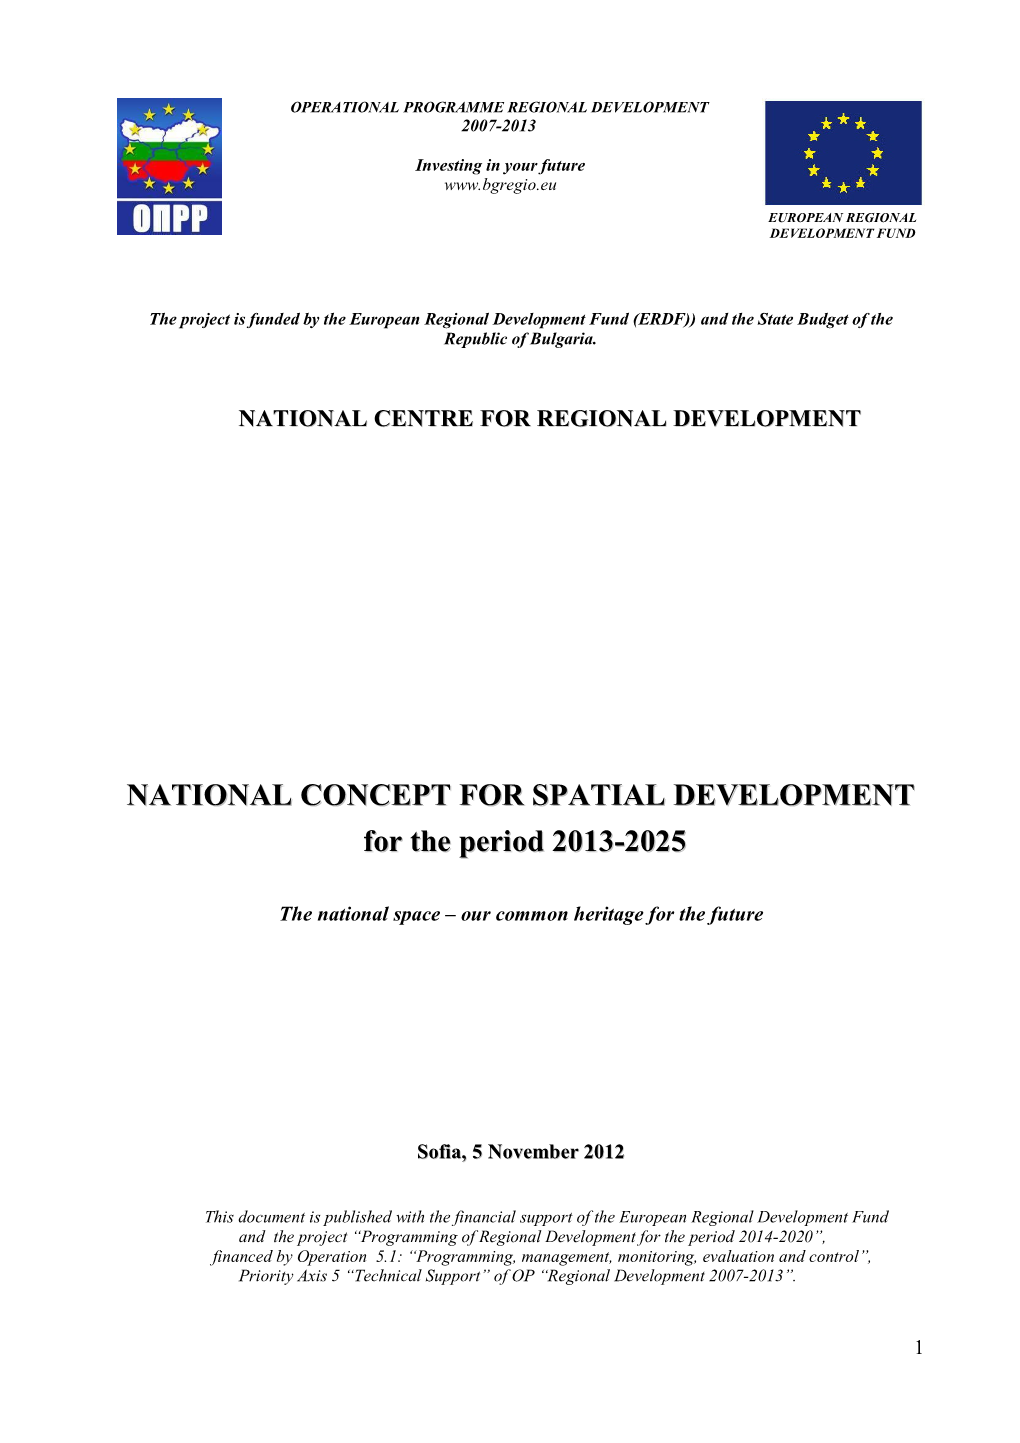 National Concept for Spatial Development 2013